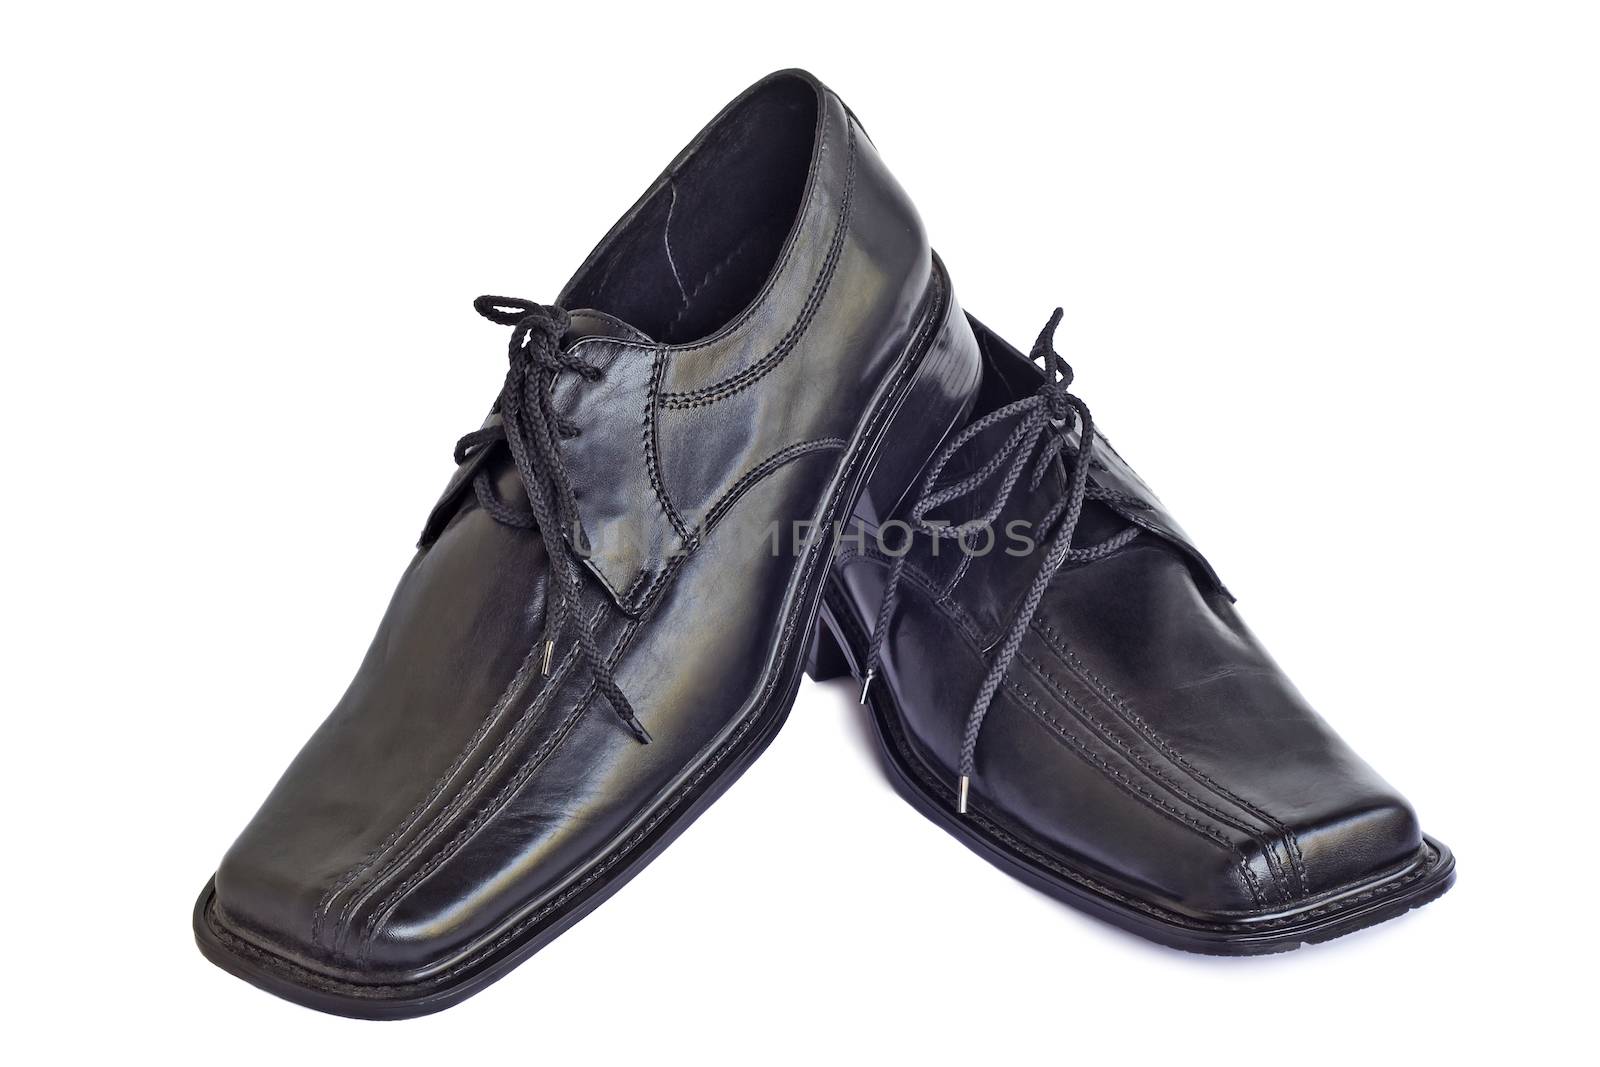 Convenient man's shoes from a genuine leather of black color. Are presented on a white background.